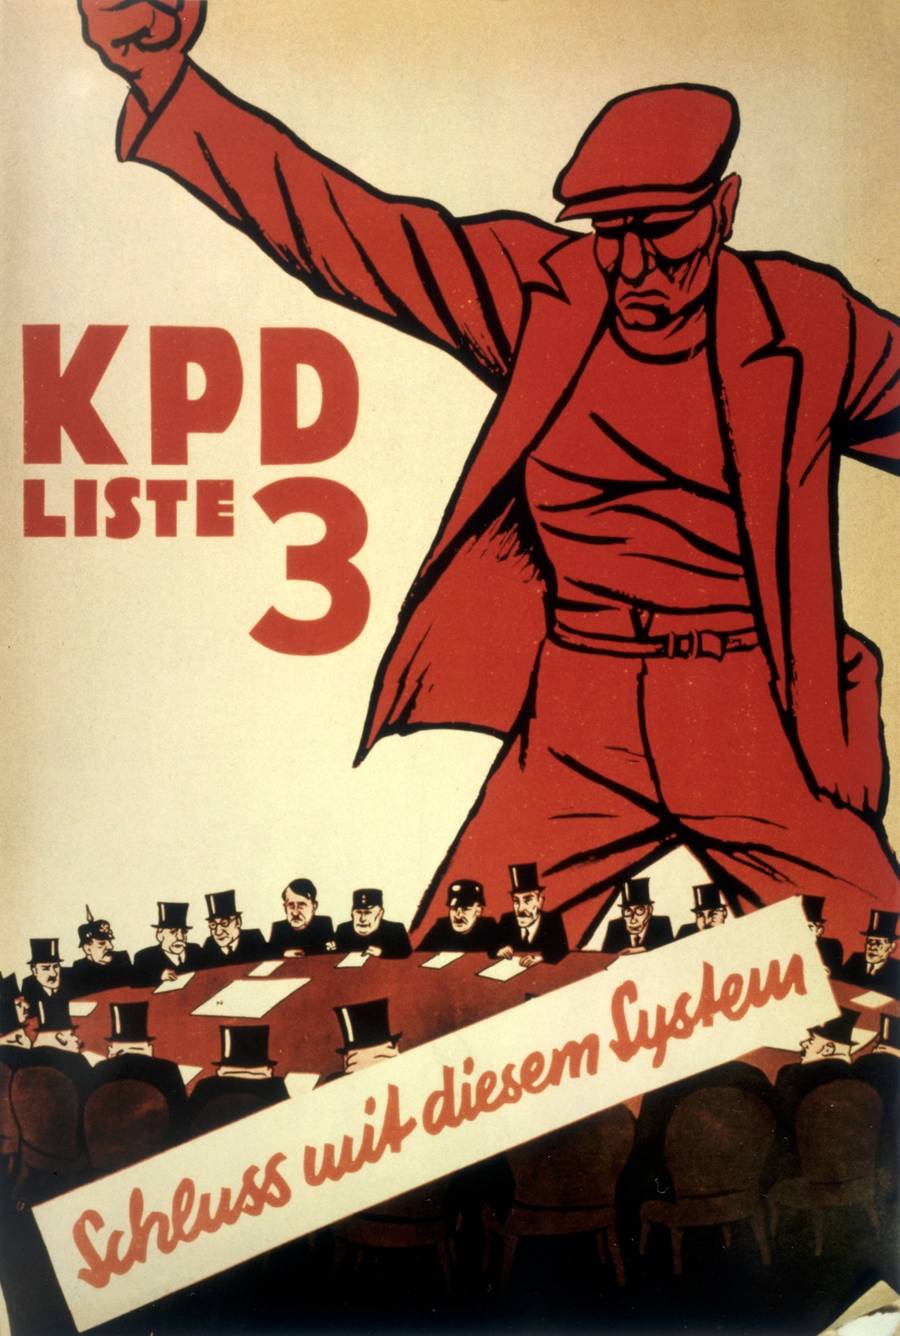 KPD election poster, 1932. The caption reads, ‘An end to this system!’